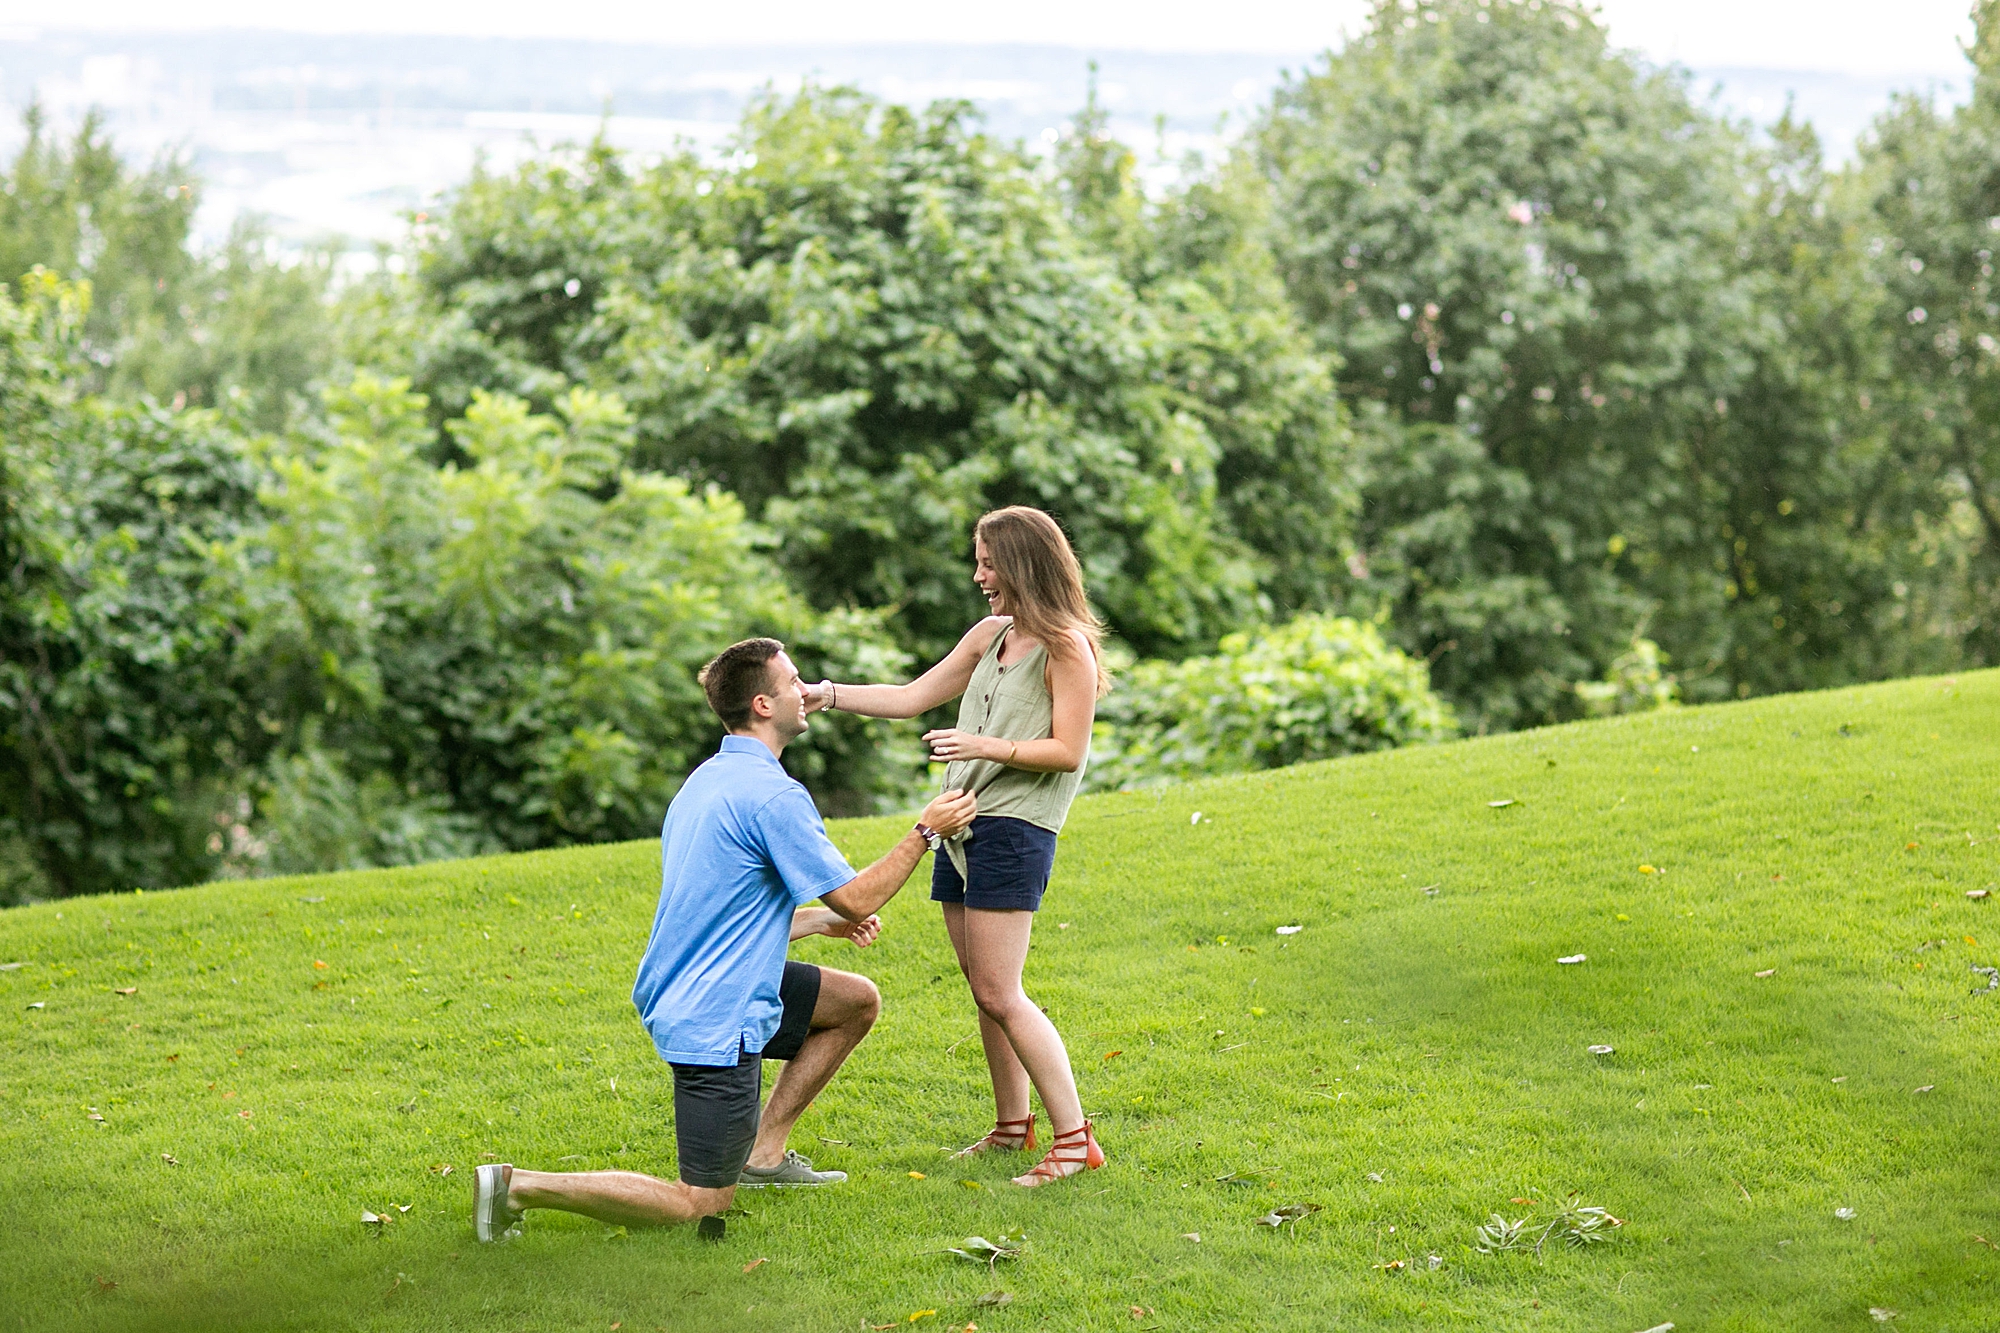 He surprised her on a mountain overlooking Birmingham, Alabama. The clouds and rain rolled in, but that didn't stop him from getting on one knee.